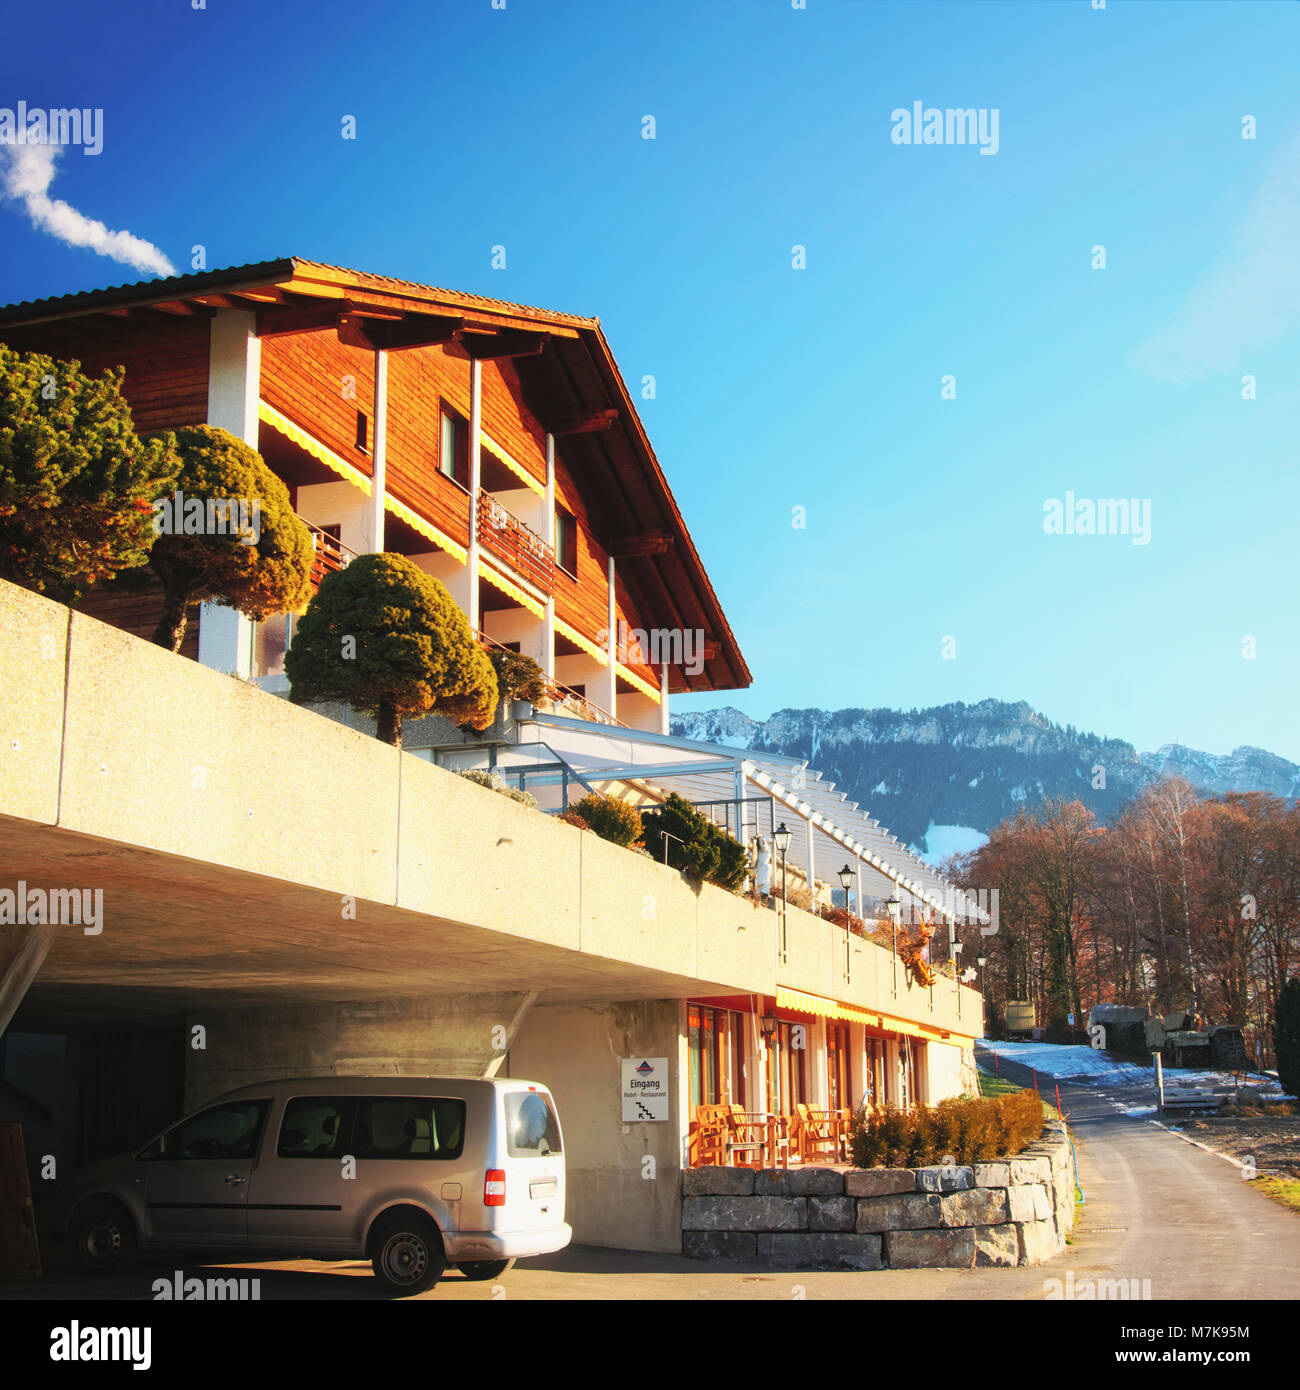 Sigriswil, Switzerland - December 31, 2013: Building with garage placed at Swiss Alps mountains and Thun lake, Switzerland in winter Stock Photo